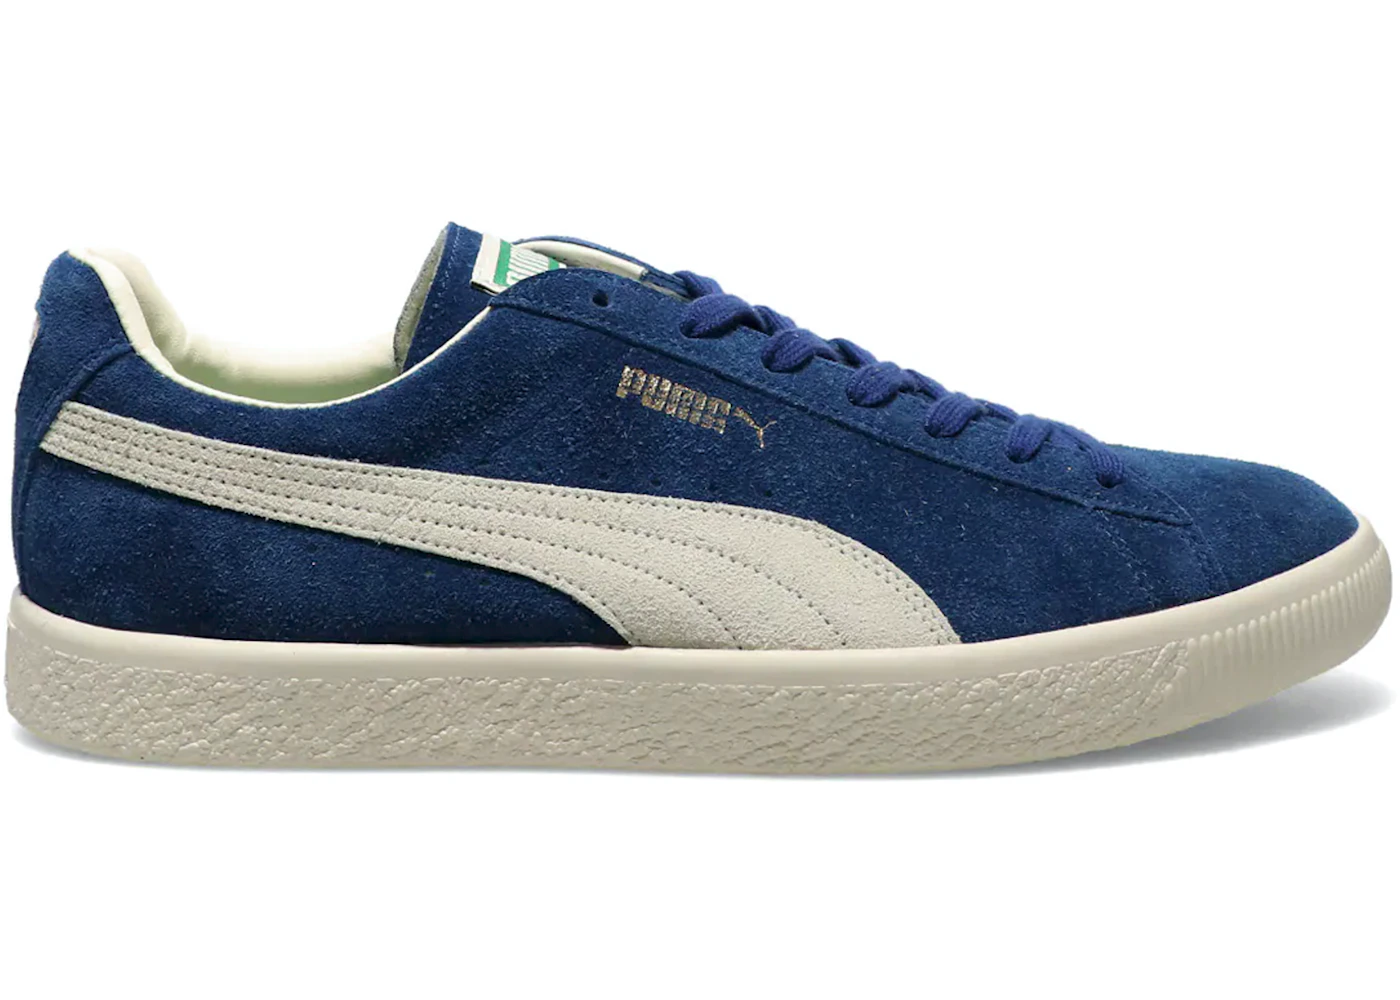 Puma Suede VTG Made in Japan Atmos Navy White Men's - 386309-01 - US